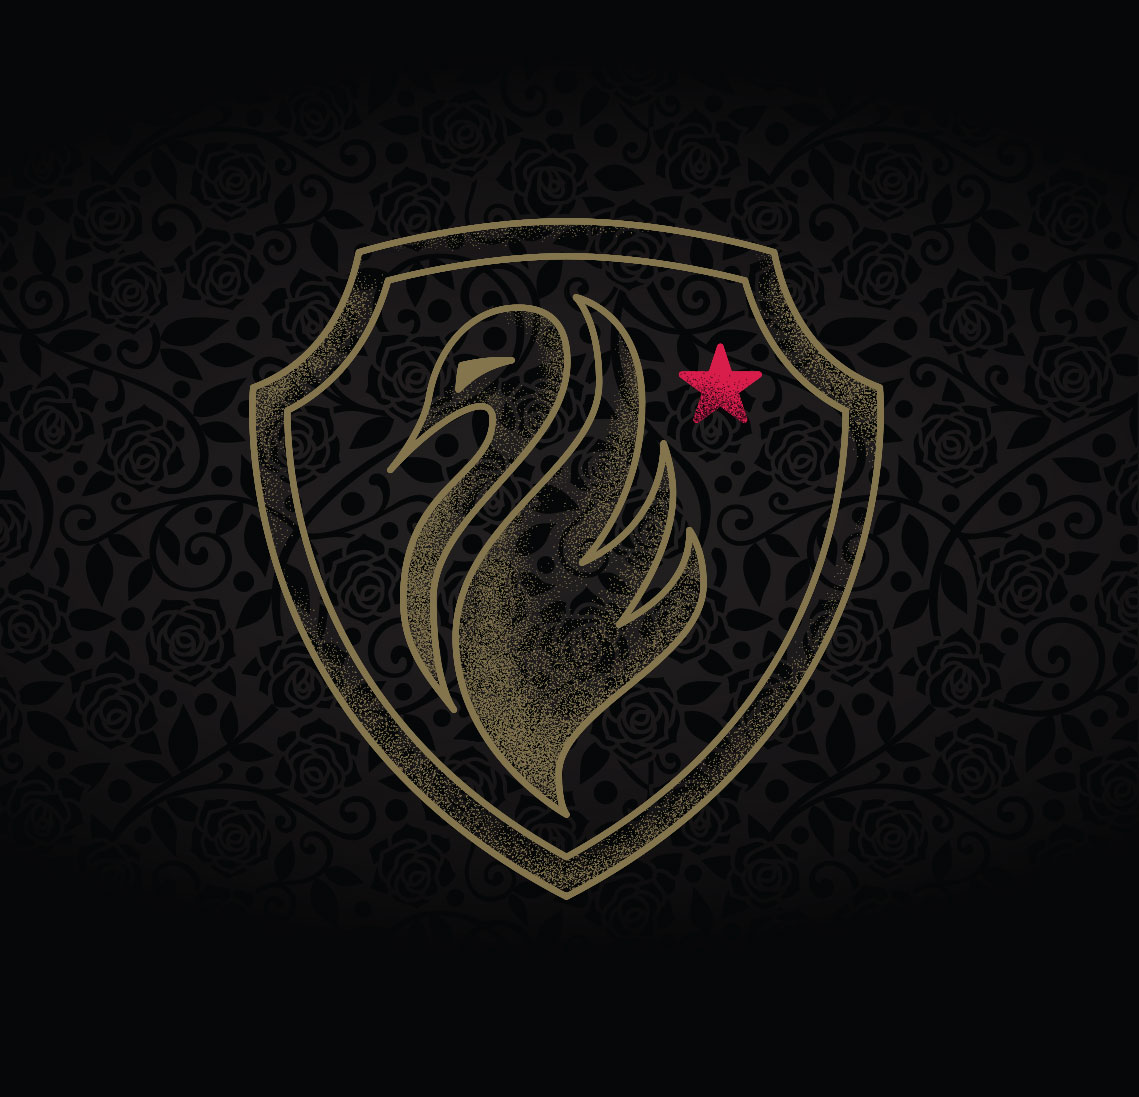 Shield with a swan and single red star on a black rose textured background